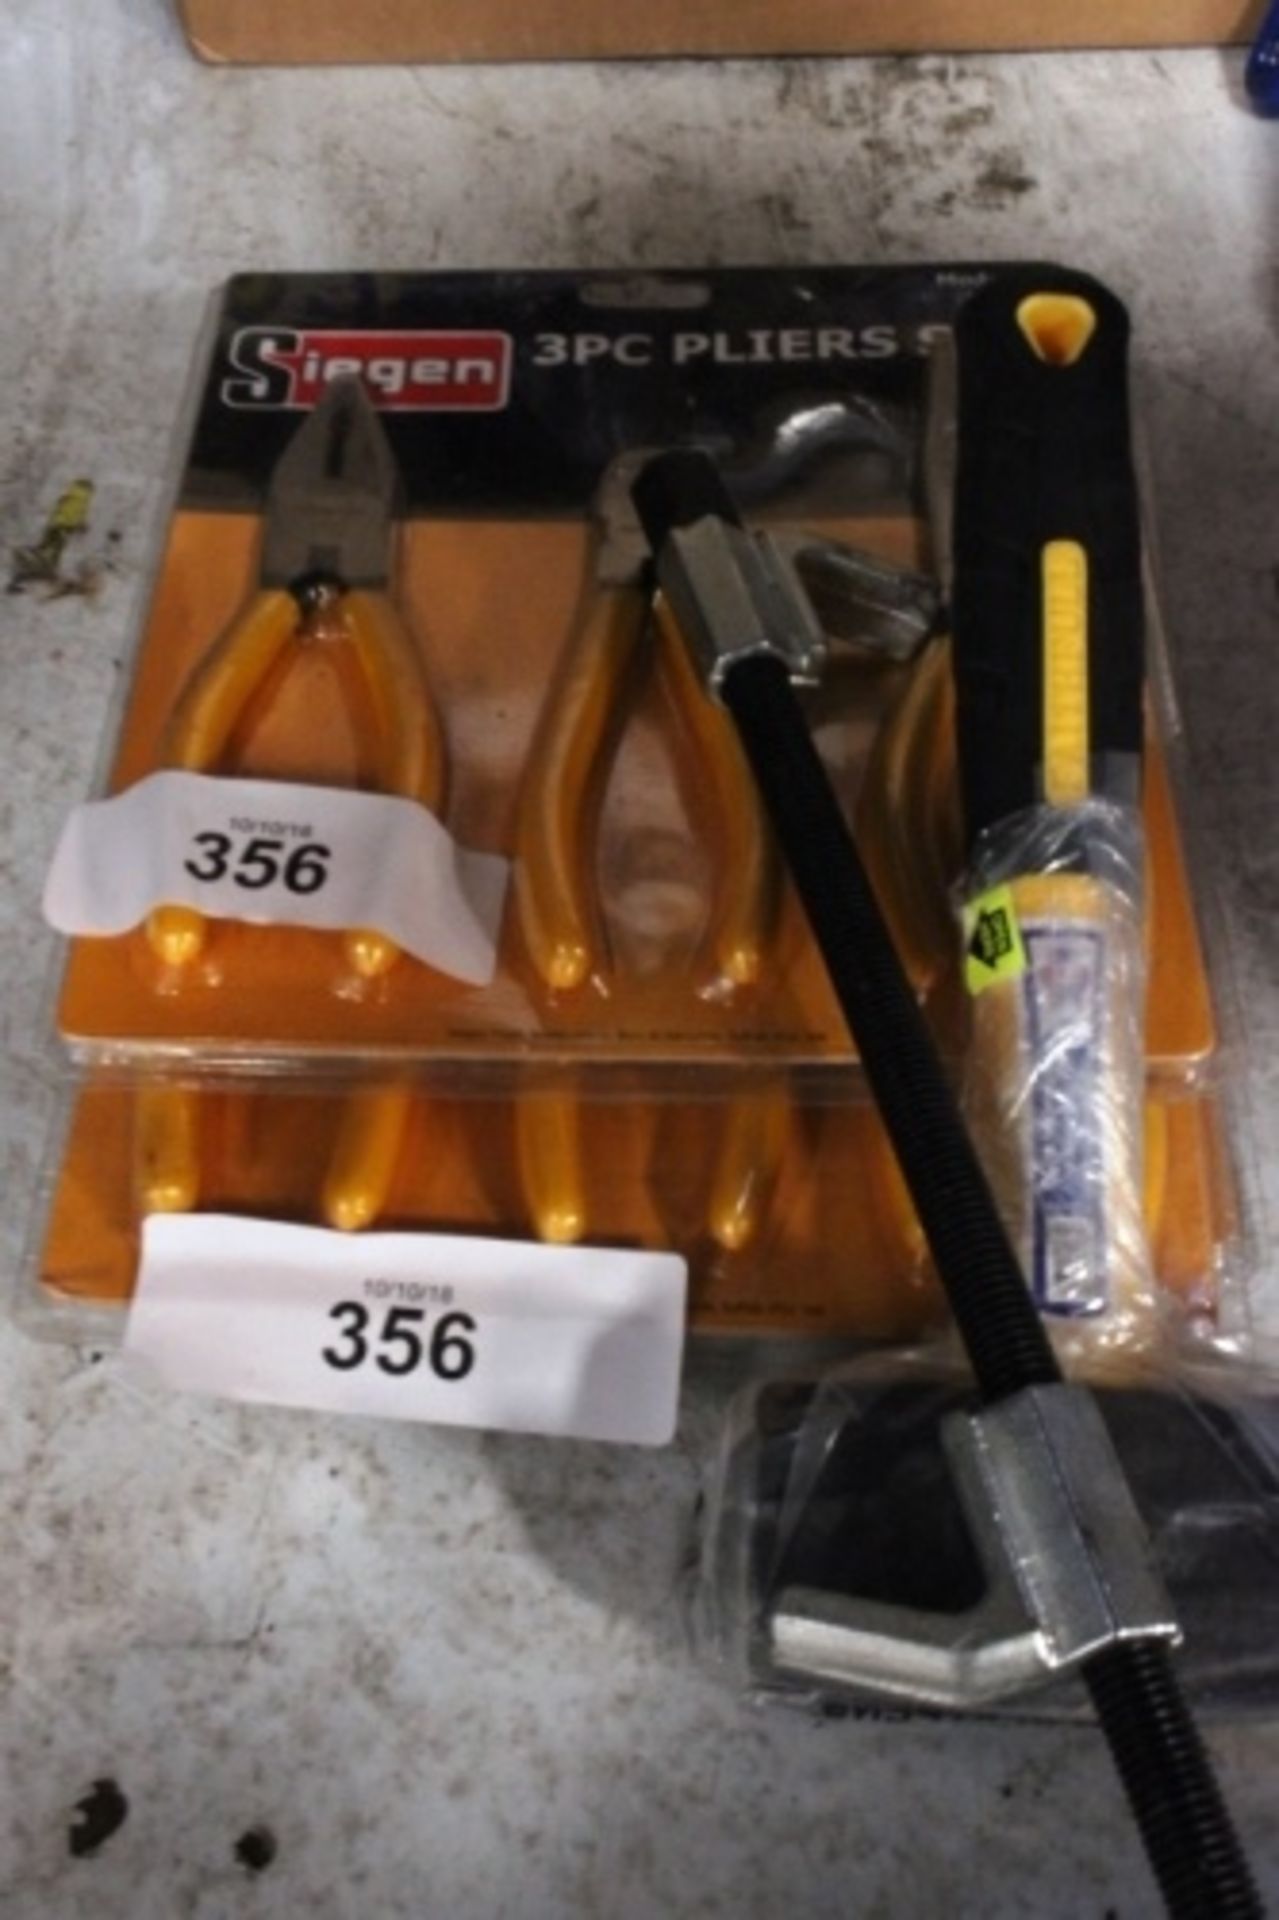 3 x Seigen plier sets together with a pair of snips and a spring compressor - Condition - Mixed (